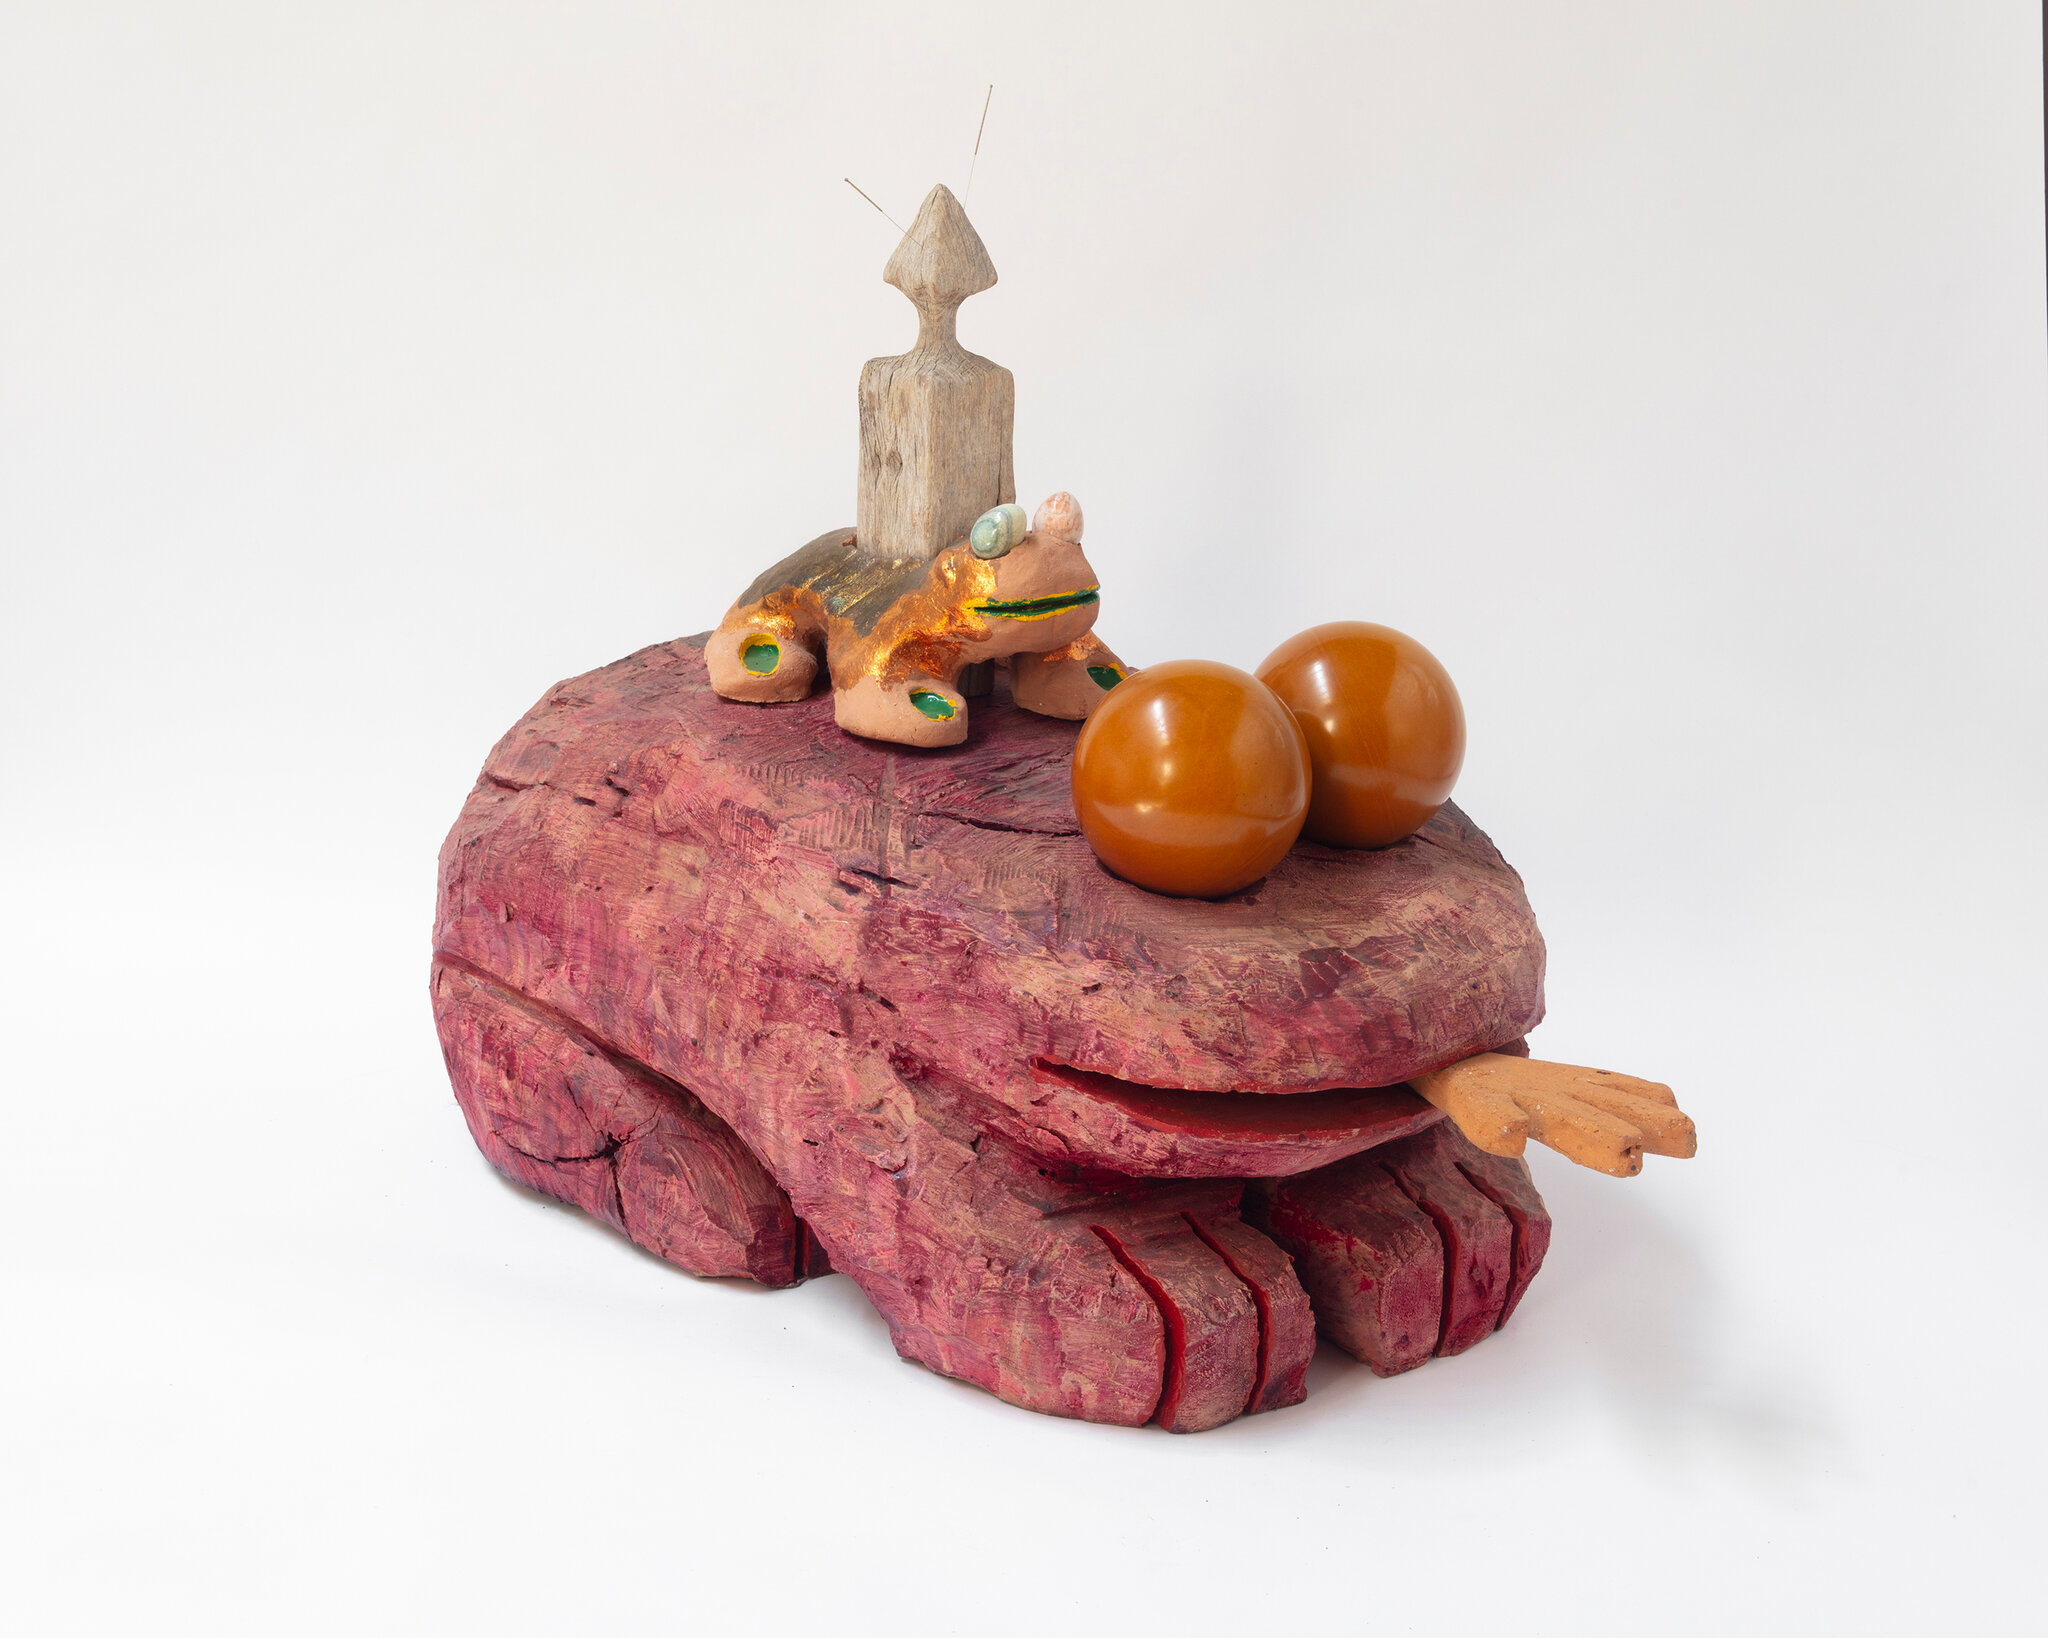 Ramiro Chaves Sapo Cochinilla, 2022 Unidentified reclaimed wood toad with various pigments. Small low-temperature ceramic toad with application of oxidized copper and silver leaf and various pigments. Stone eyes. Inlay of salified oak wood and acupuncture needles. Eyes of pigmented carob wood bowls. Low temperature ceramic tongue. 80 × 45 × 60 cm (31 ½ × 17 ¾ × 23 ⅝ inches)